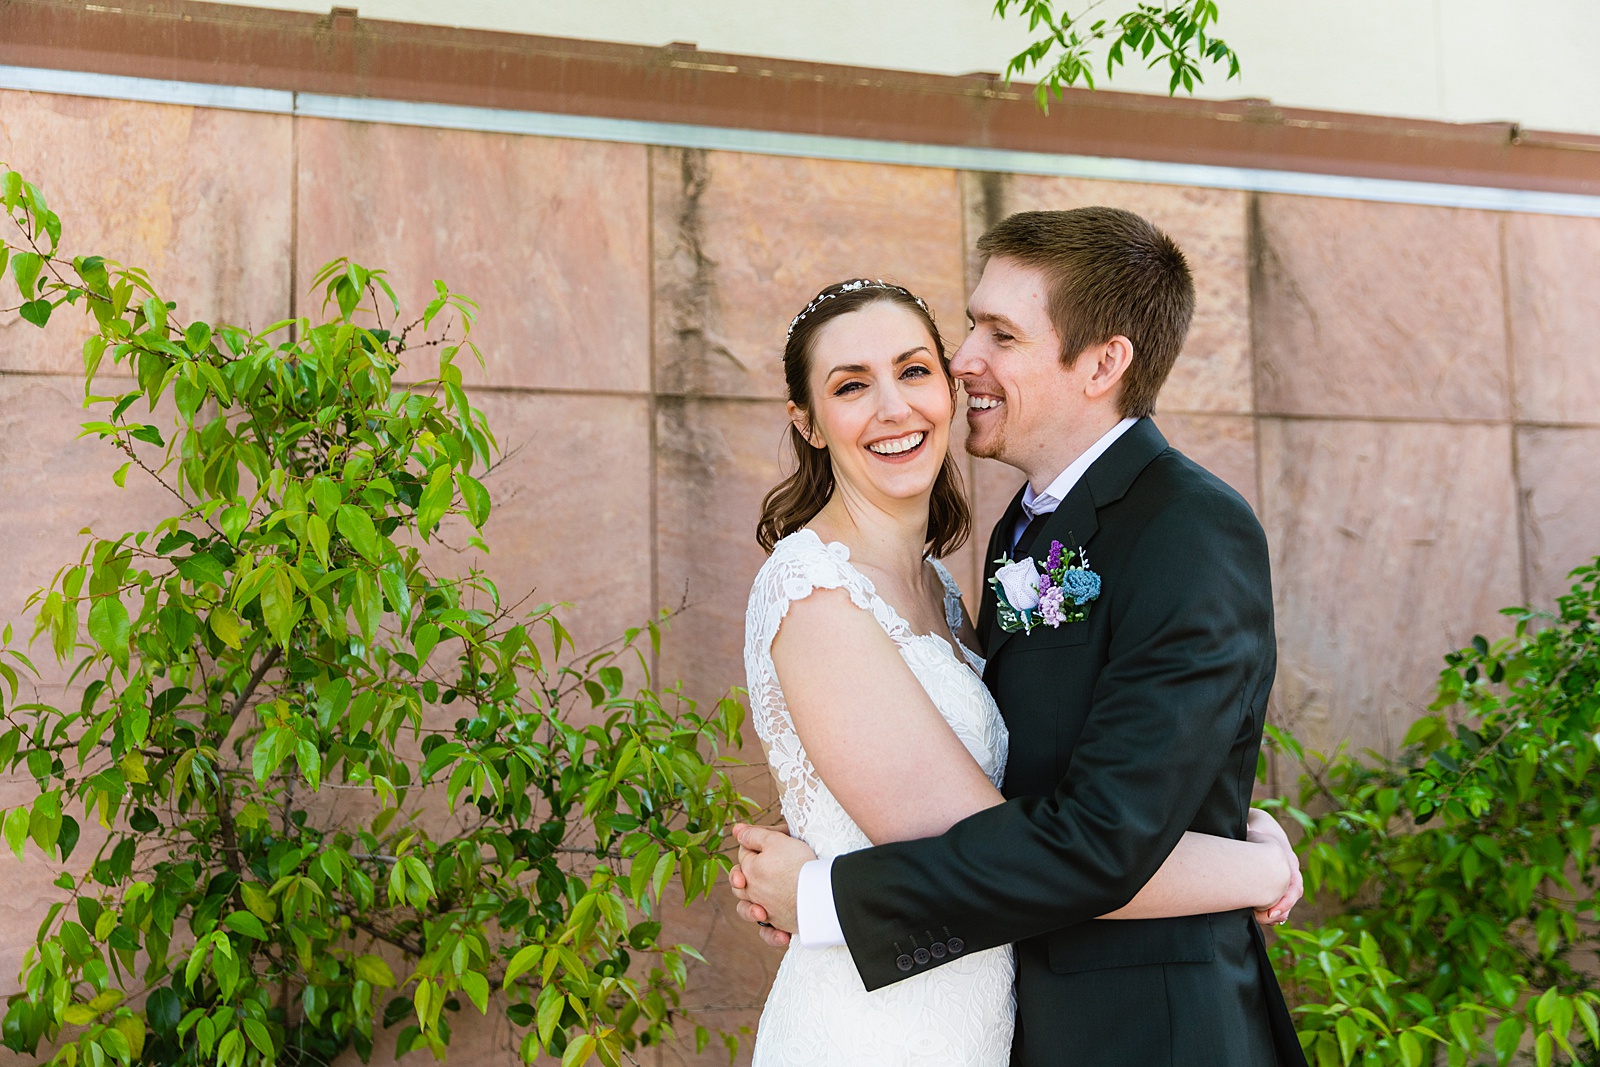 Bride and groom laughing together during their Chandler Community Center wedding by Chandler wedding photographer PMA Photography.